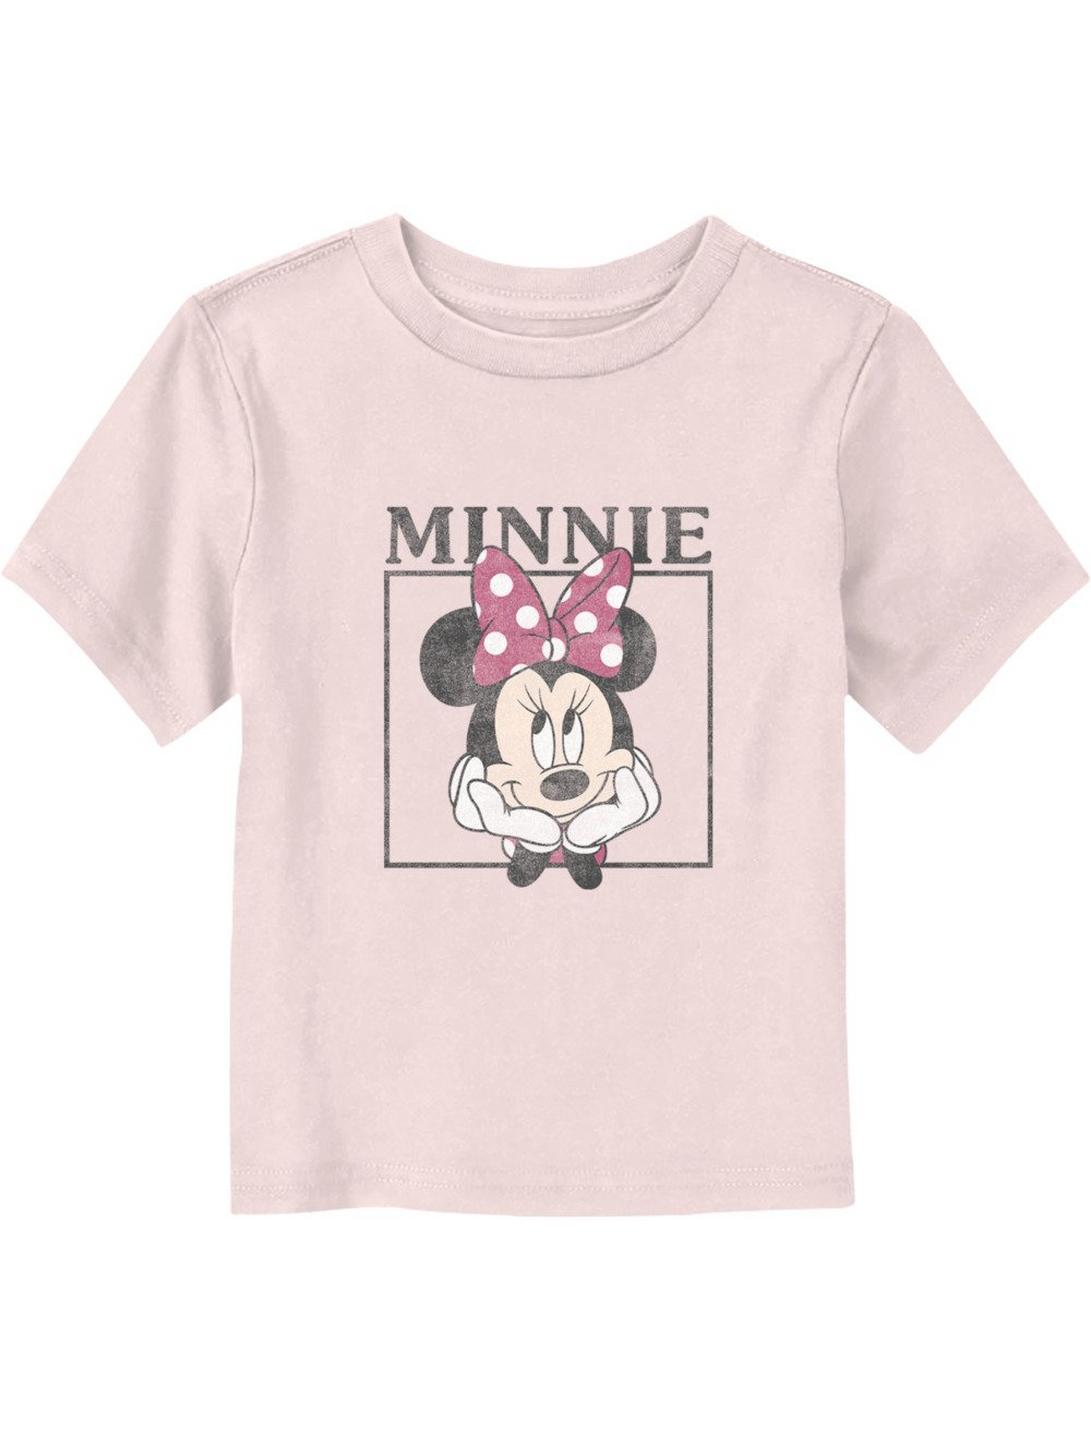 Disney Minnie Mouse Boxed Minnie Toddler T-Shirt, LIGHT PINK, hi-res